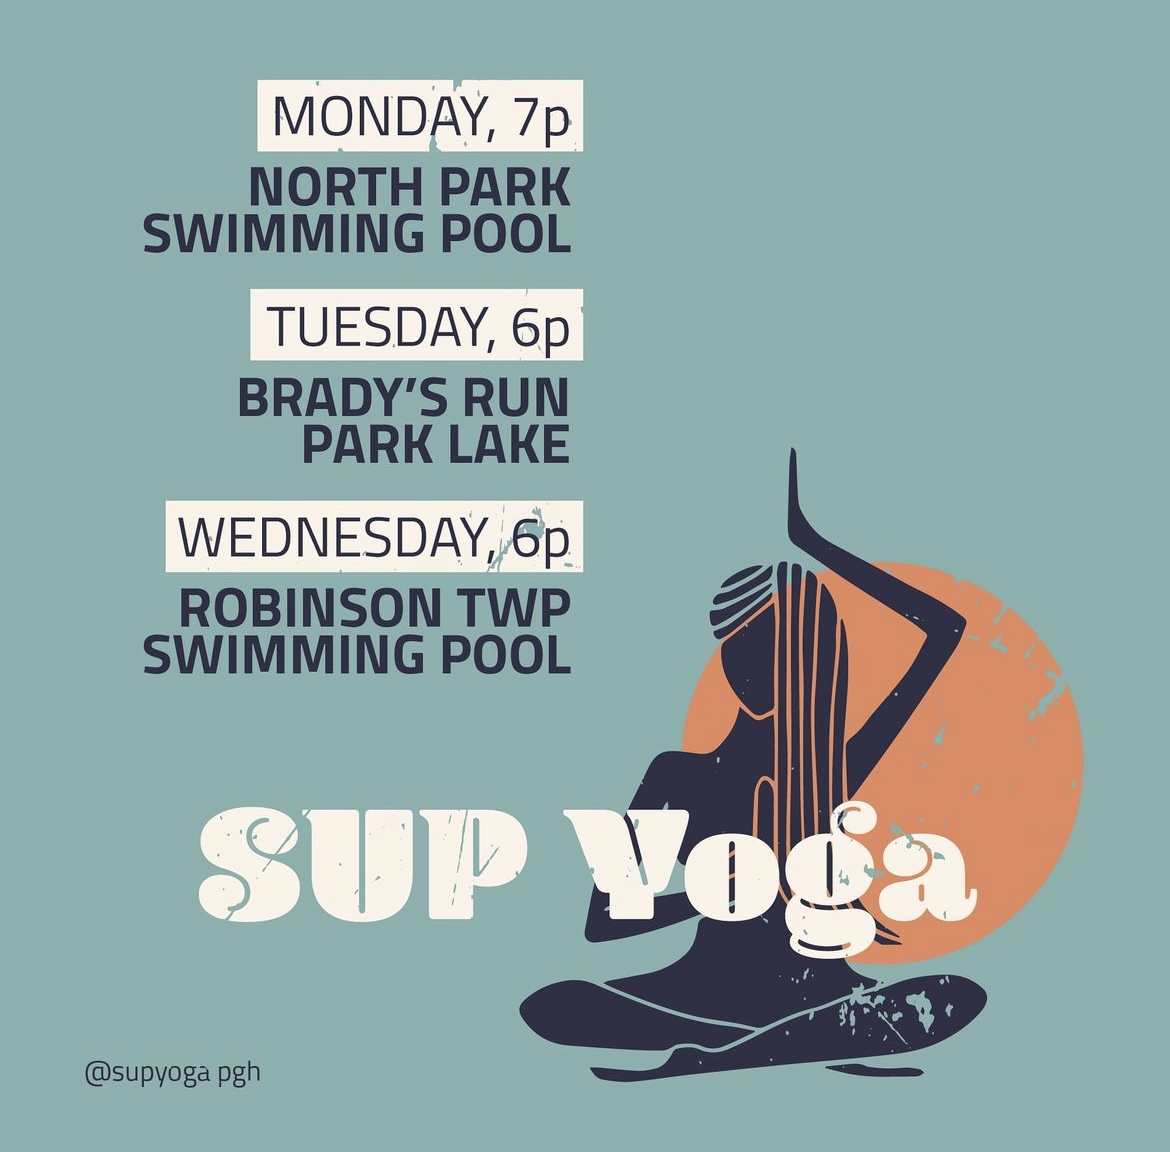 An Instagram graphic describing SUP Yoga's upcoming classes:
"Monday, 7p, North Park Swimming Pool. Tuesday, 6p, Brady's Run Park Lake. Wednesday, 6p, Robinson Twp Swimming Pool."